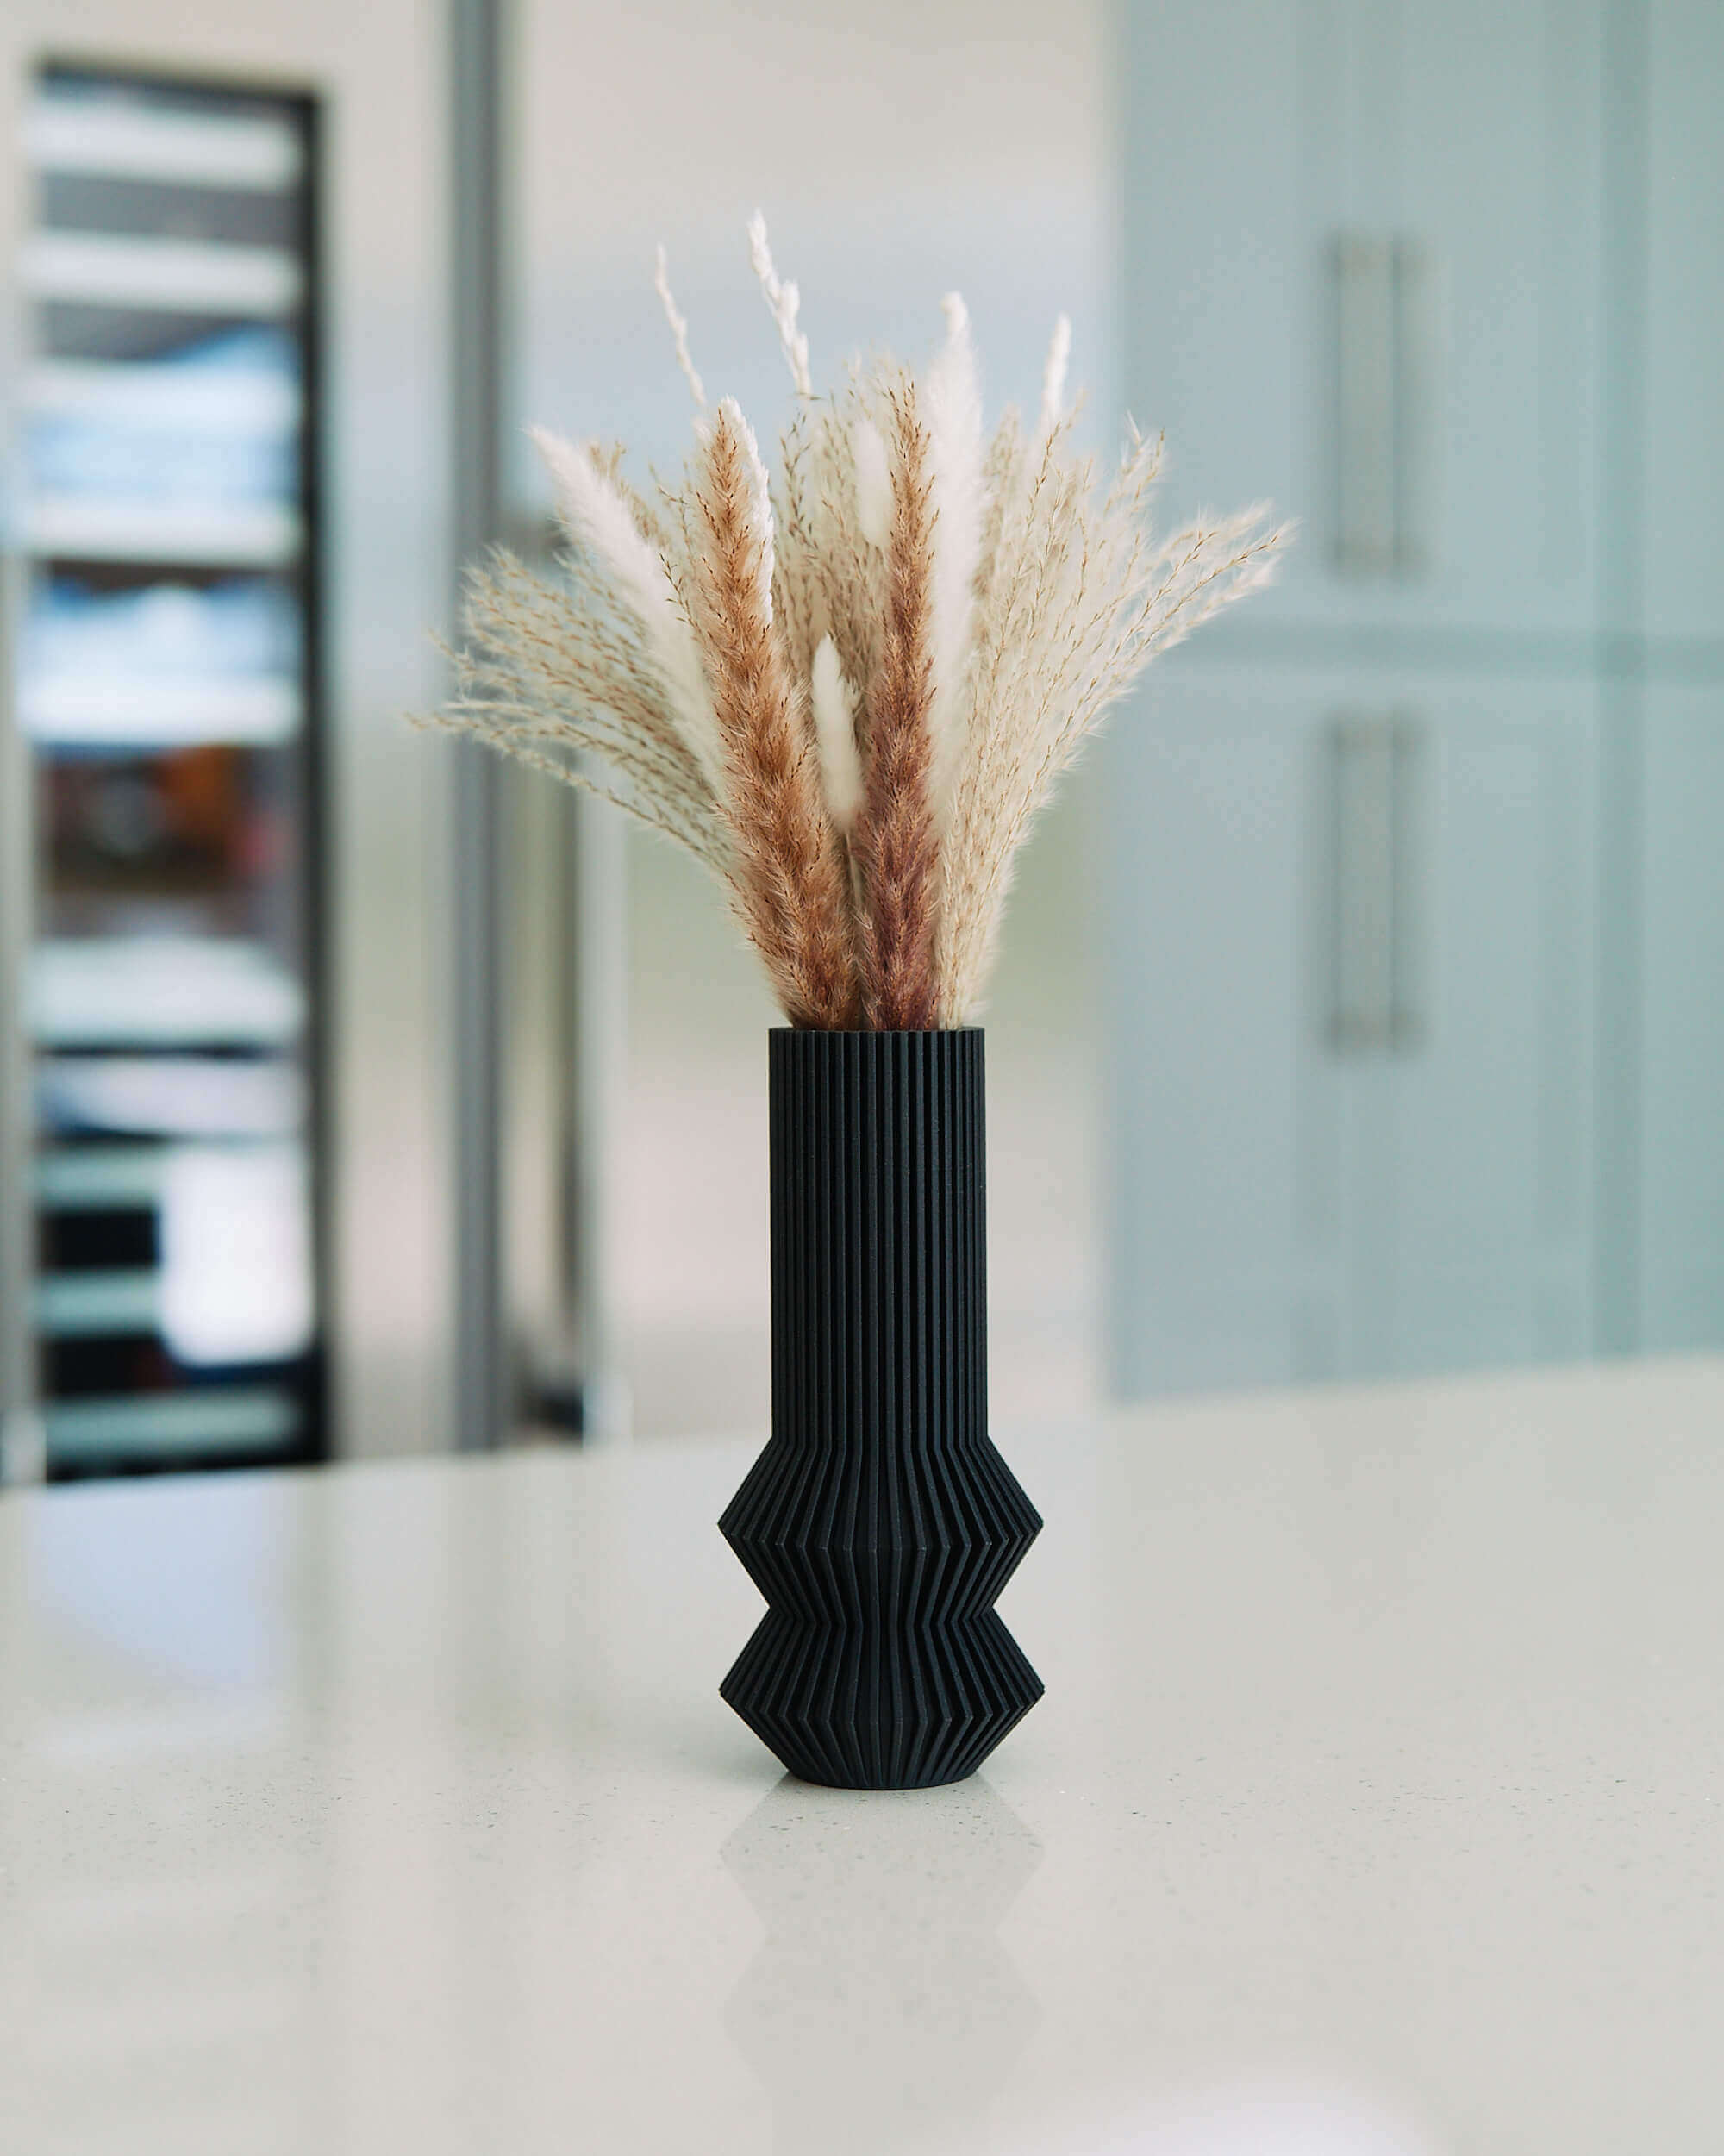 A black matte vase / modernist vase by Woodland Pulse. This is a vase with pampas grass on a white marble countertop.